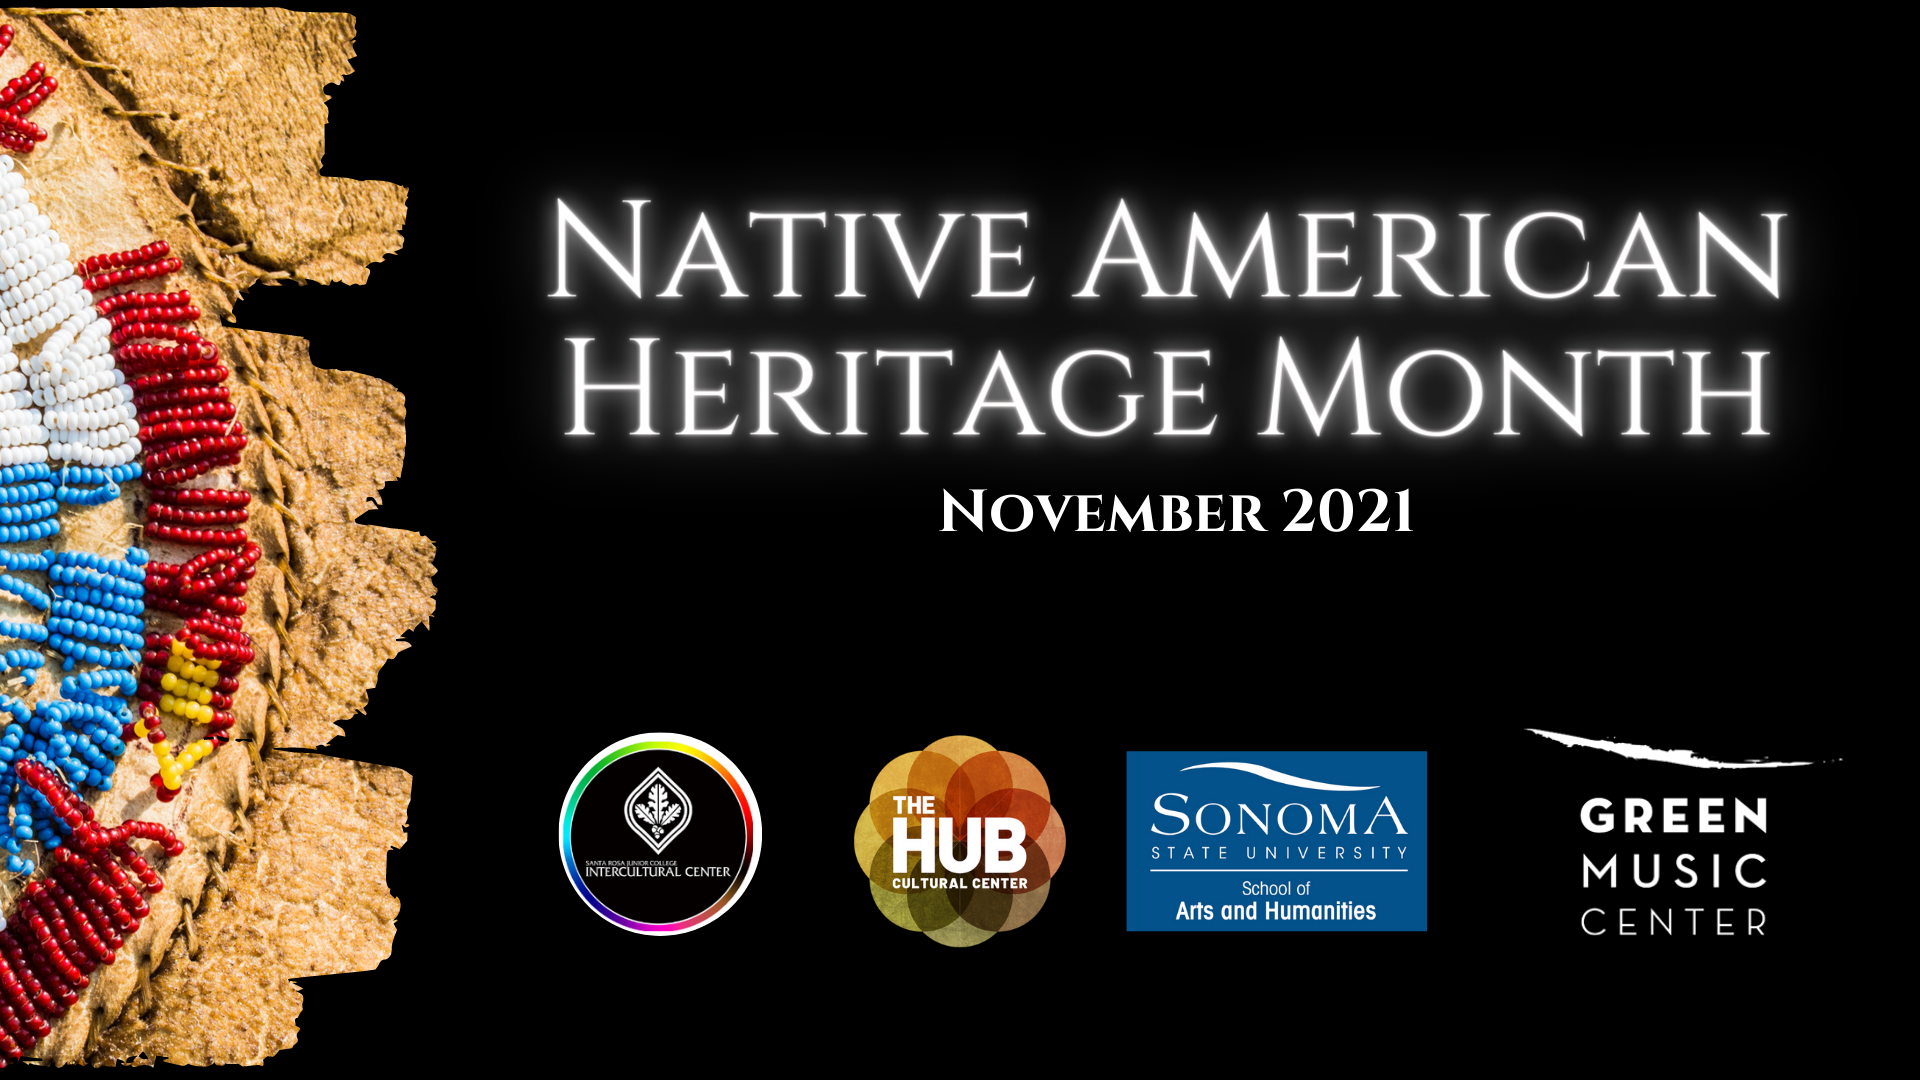 Image stating Native American Heritage Month November 2021. Logos of SR Intercultural Center, The HUB Cultural Center, Sonoma State Arts & Humanities, Green Music Center